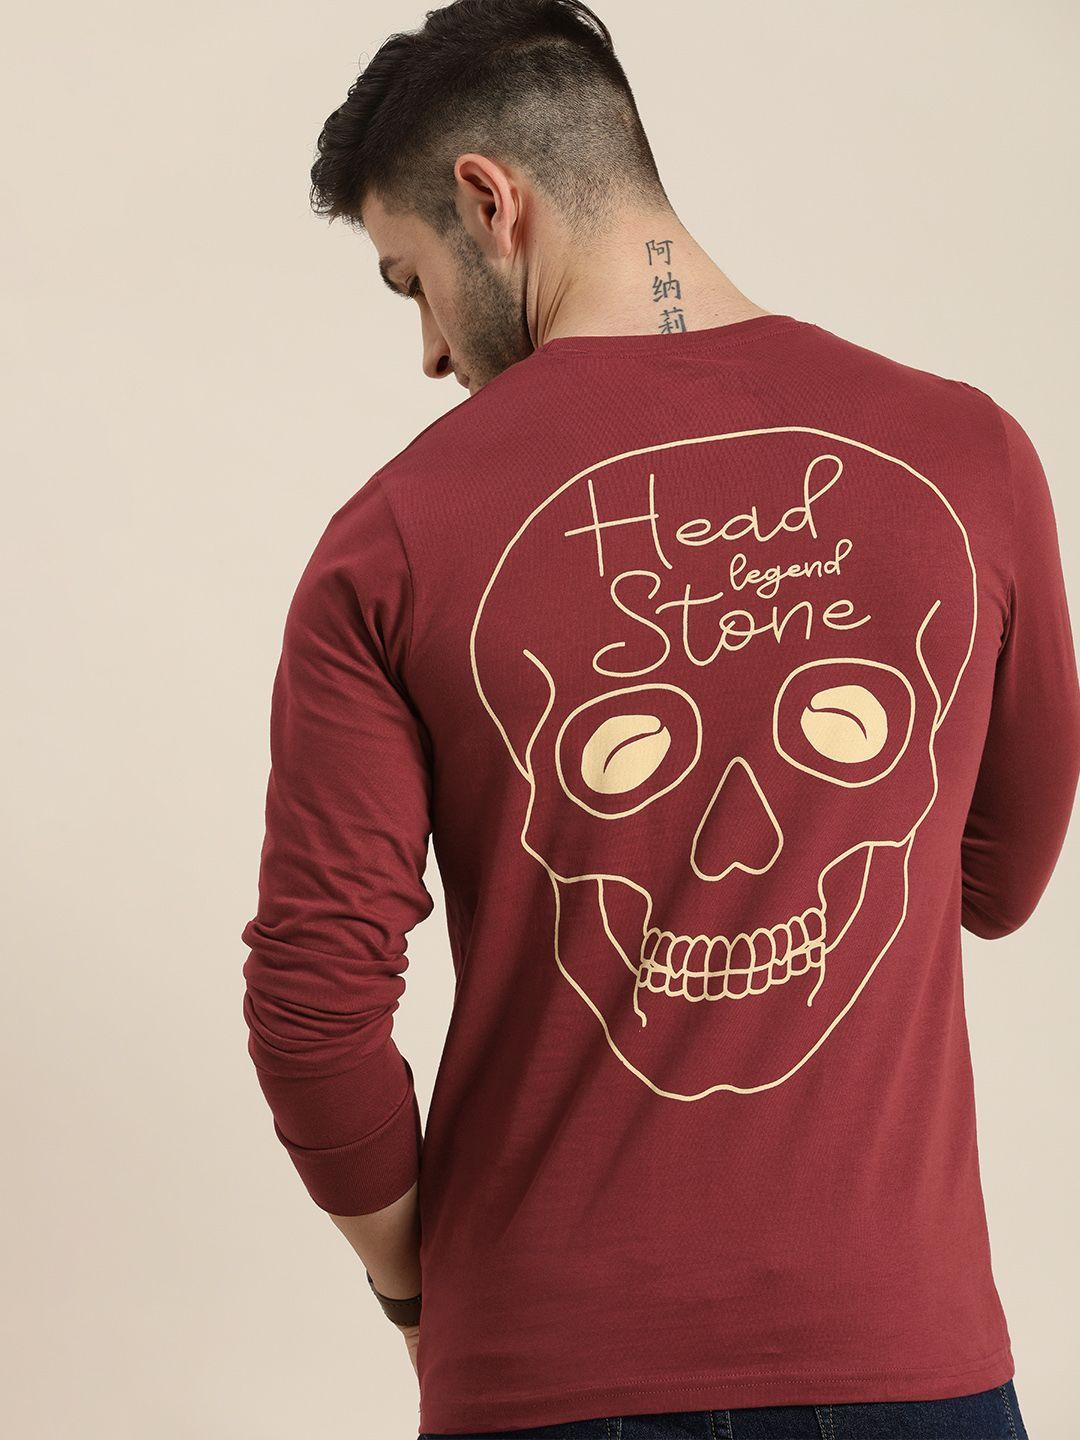 difference of opinion men maroon printed t-shirt